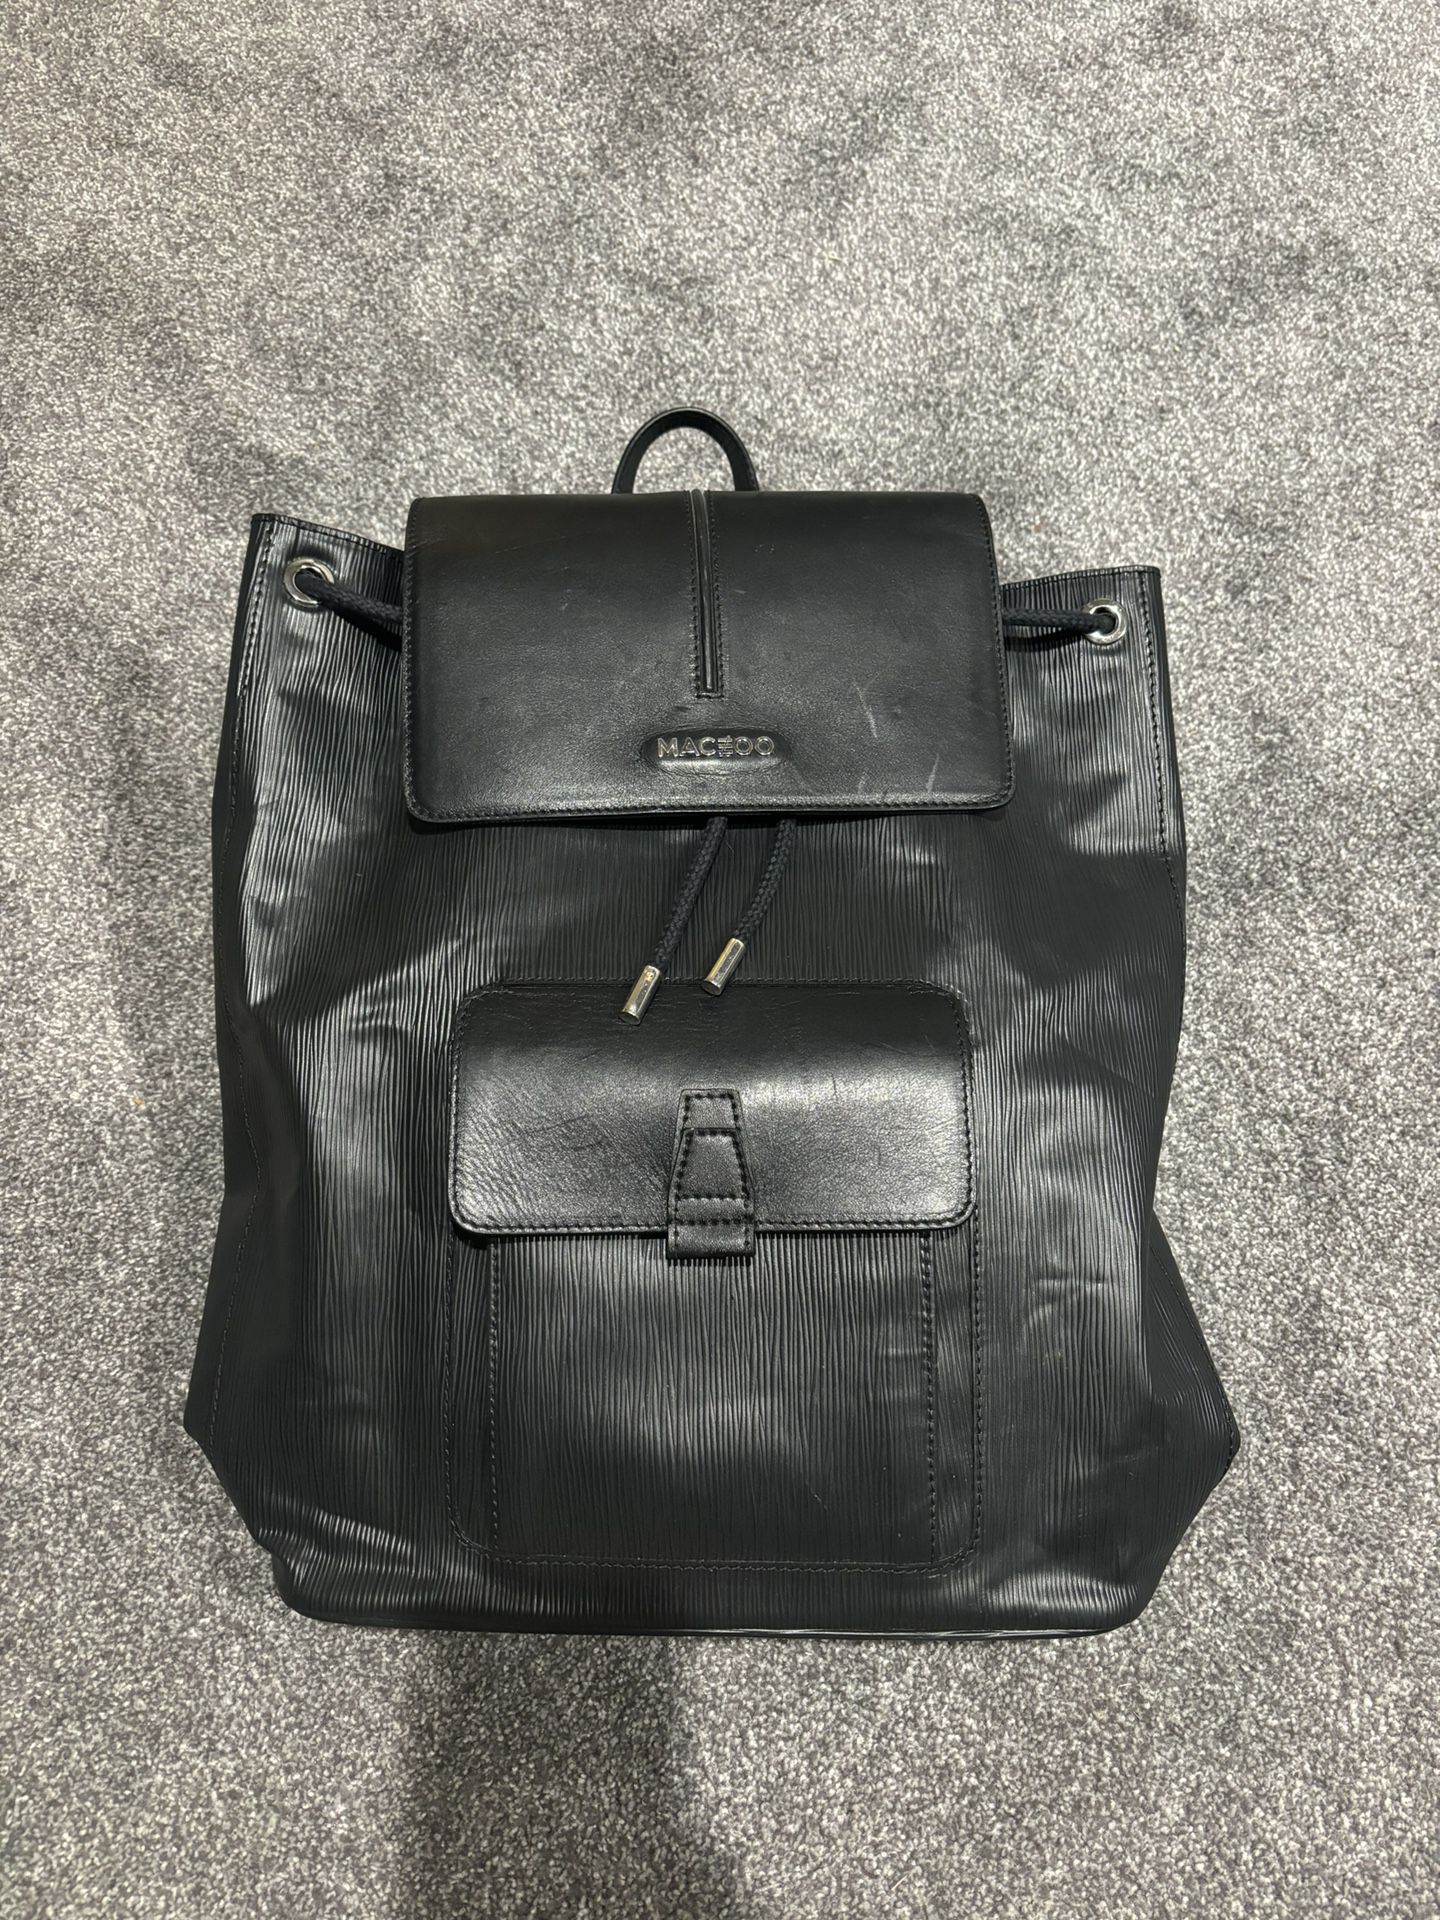 MACEOO LEATHER BAG